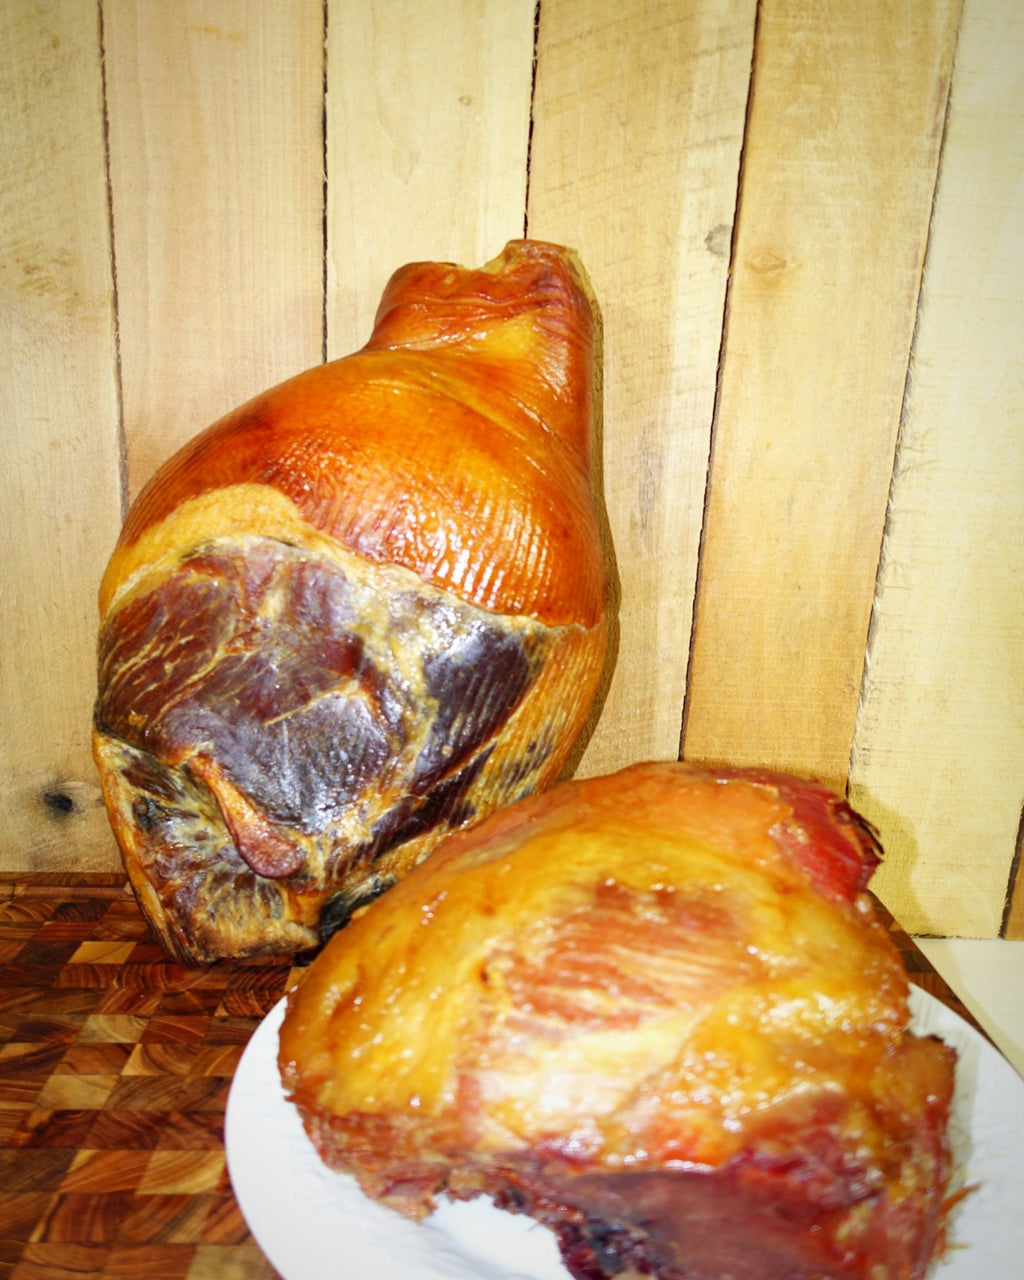 Father's FULLY Cooked Country Ham Before and After Cooking